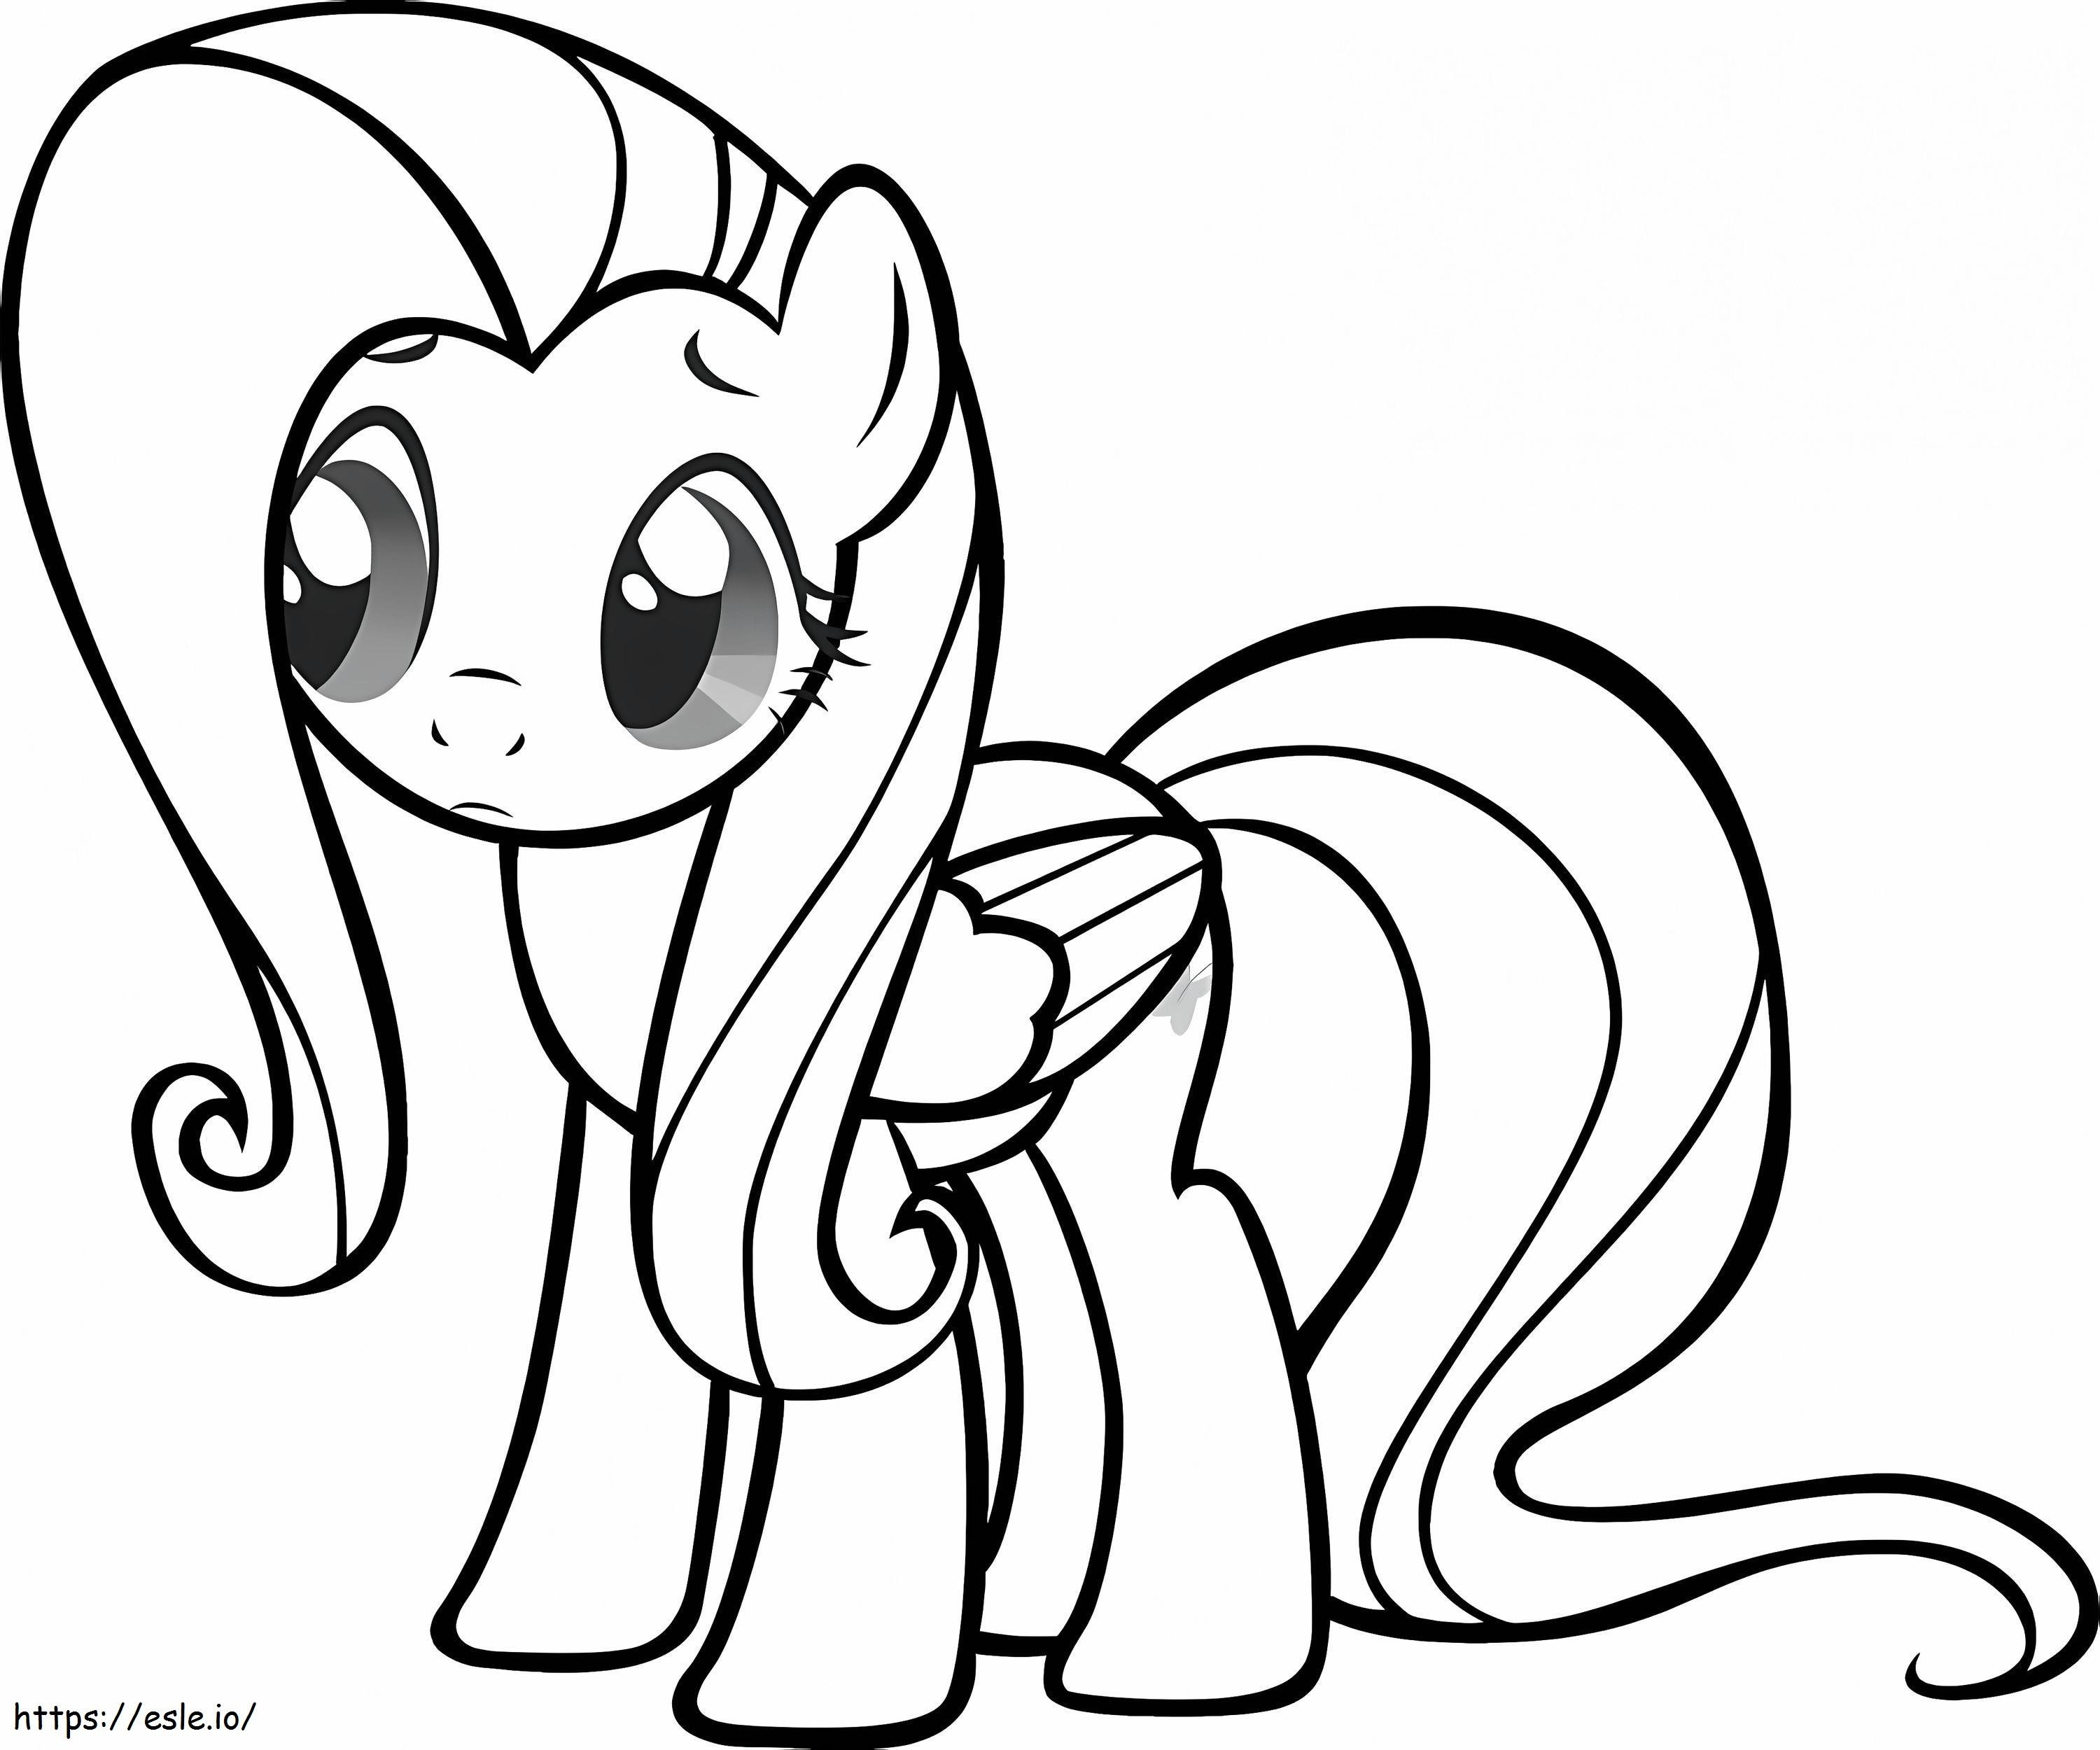 Fluttershy Pony coloring page